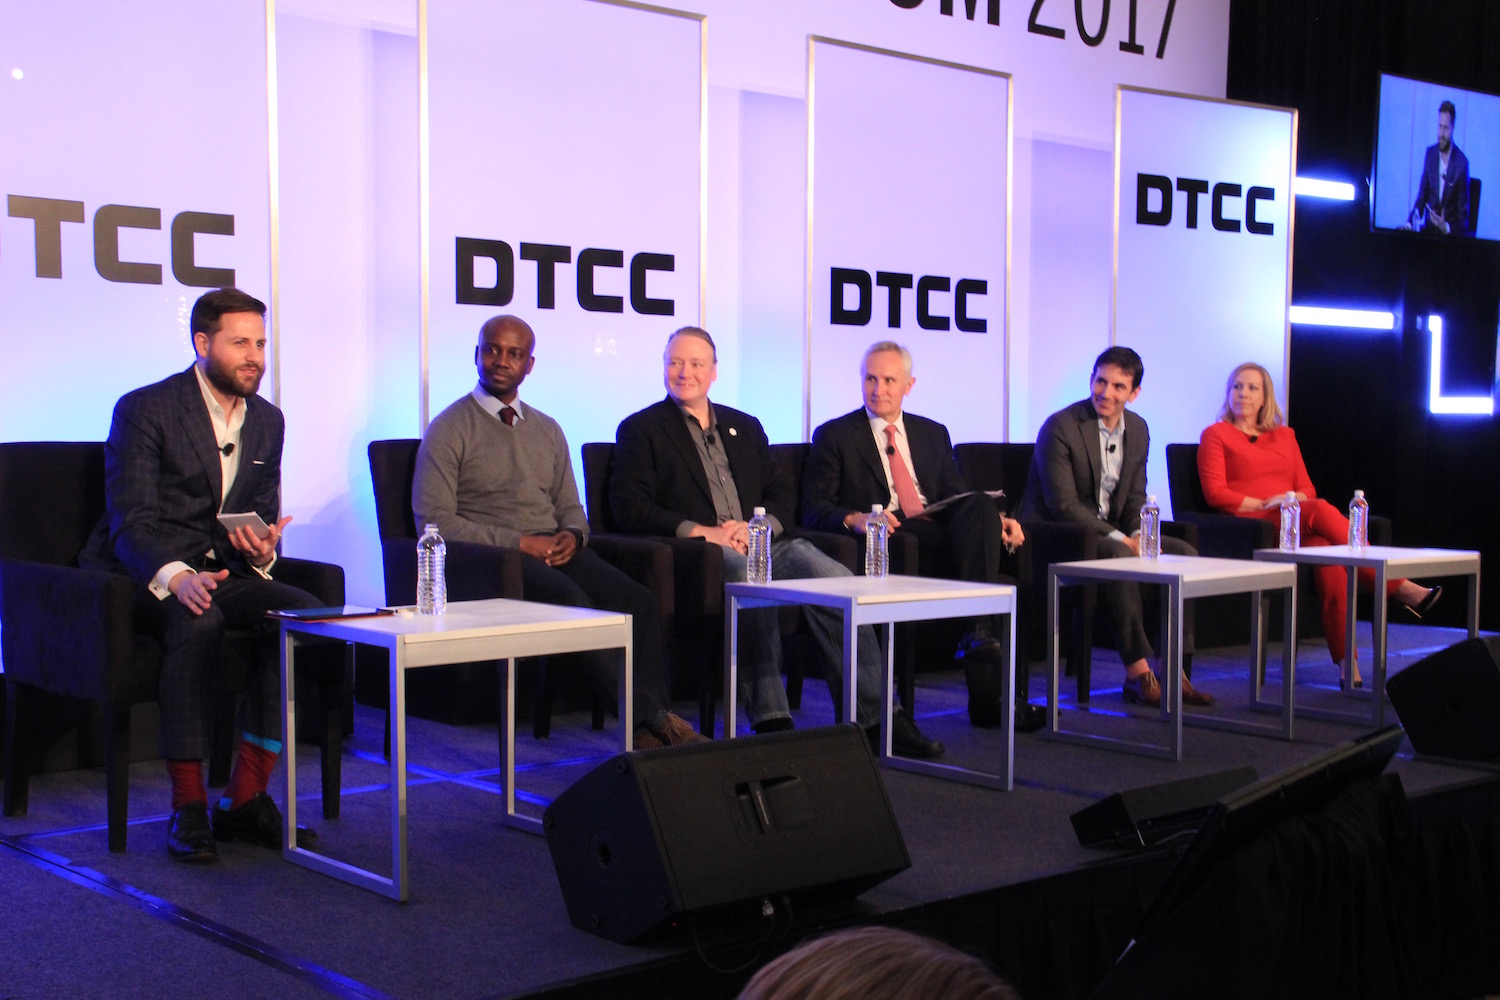 DTCC Calls on Banks and Regulators to Assist Deal with Blockchain Safety Points